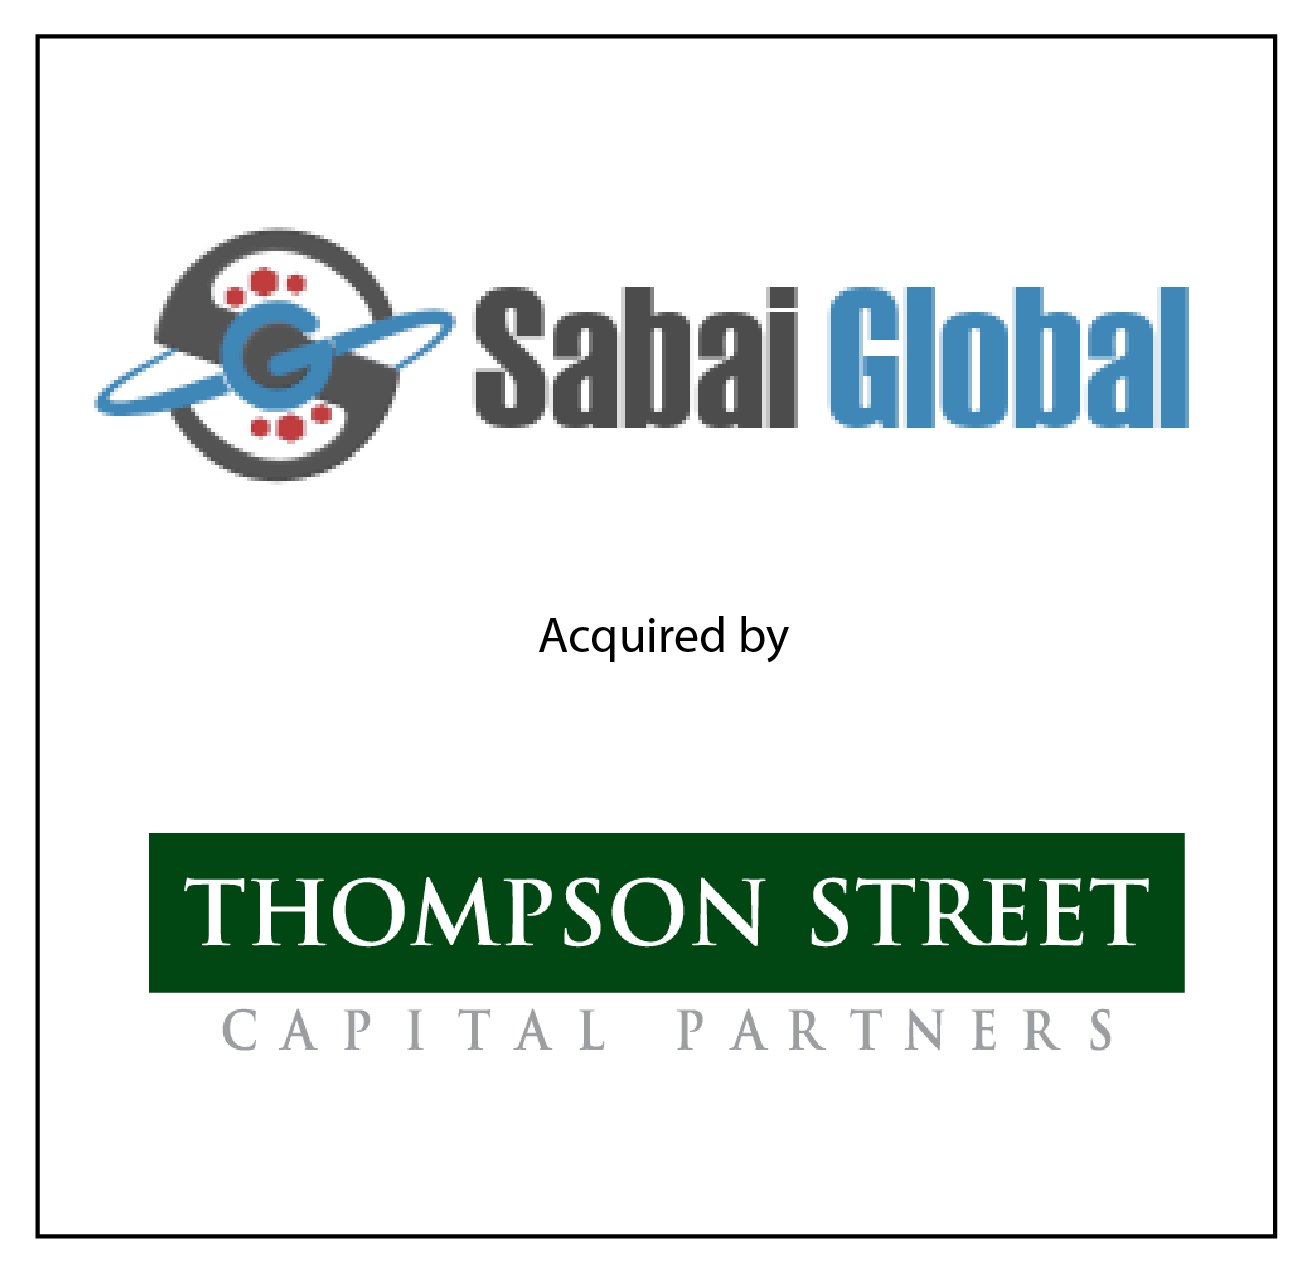 Sabai Global Acquired by Thompson Street Capital Partners to Accelerate IBC and IRB Growth